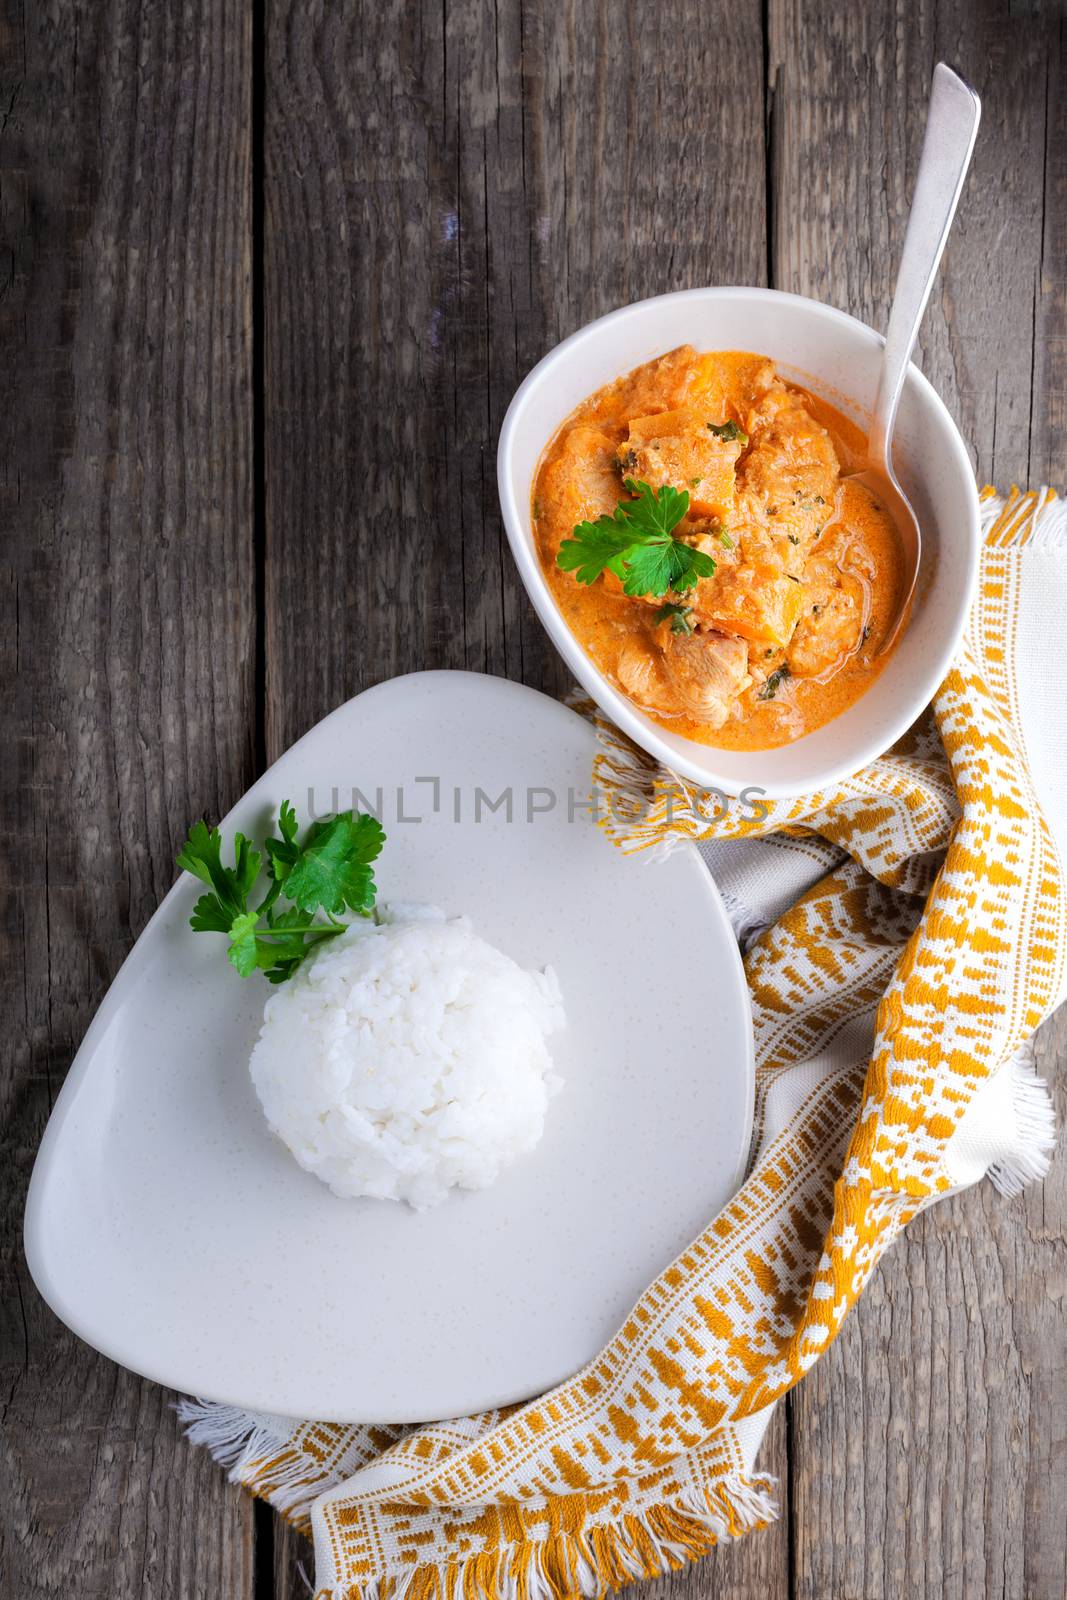 Chicken curry and rice on a wooden surface